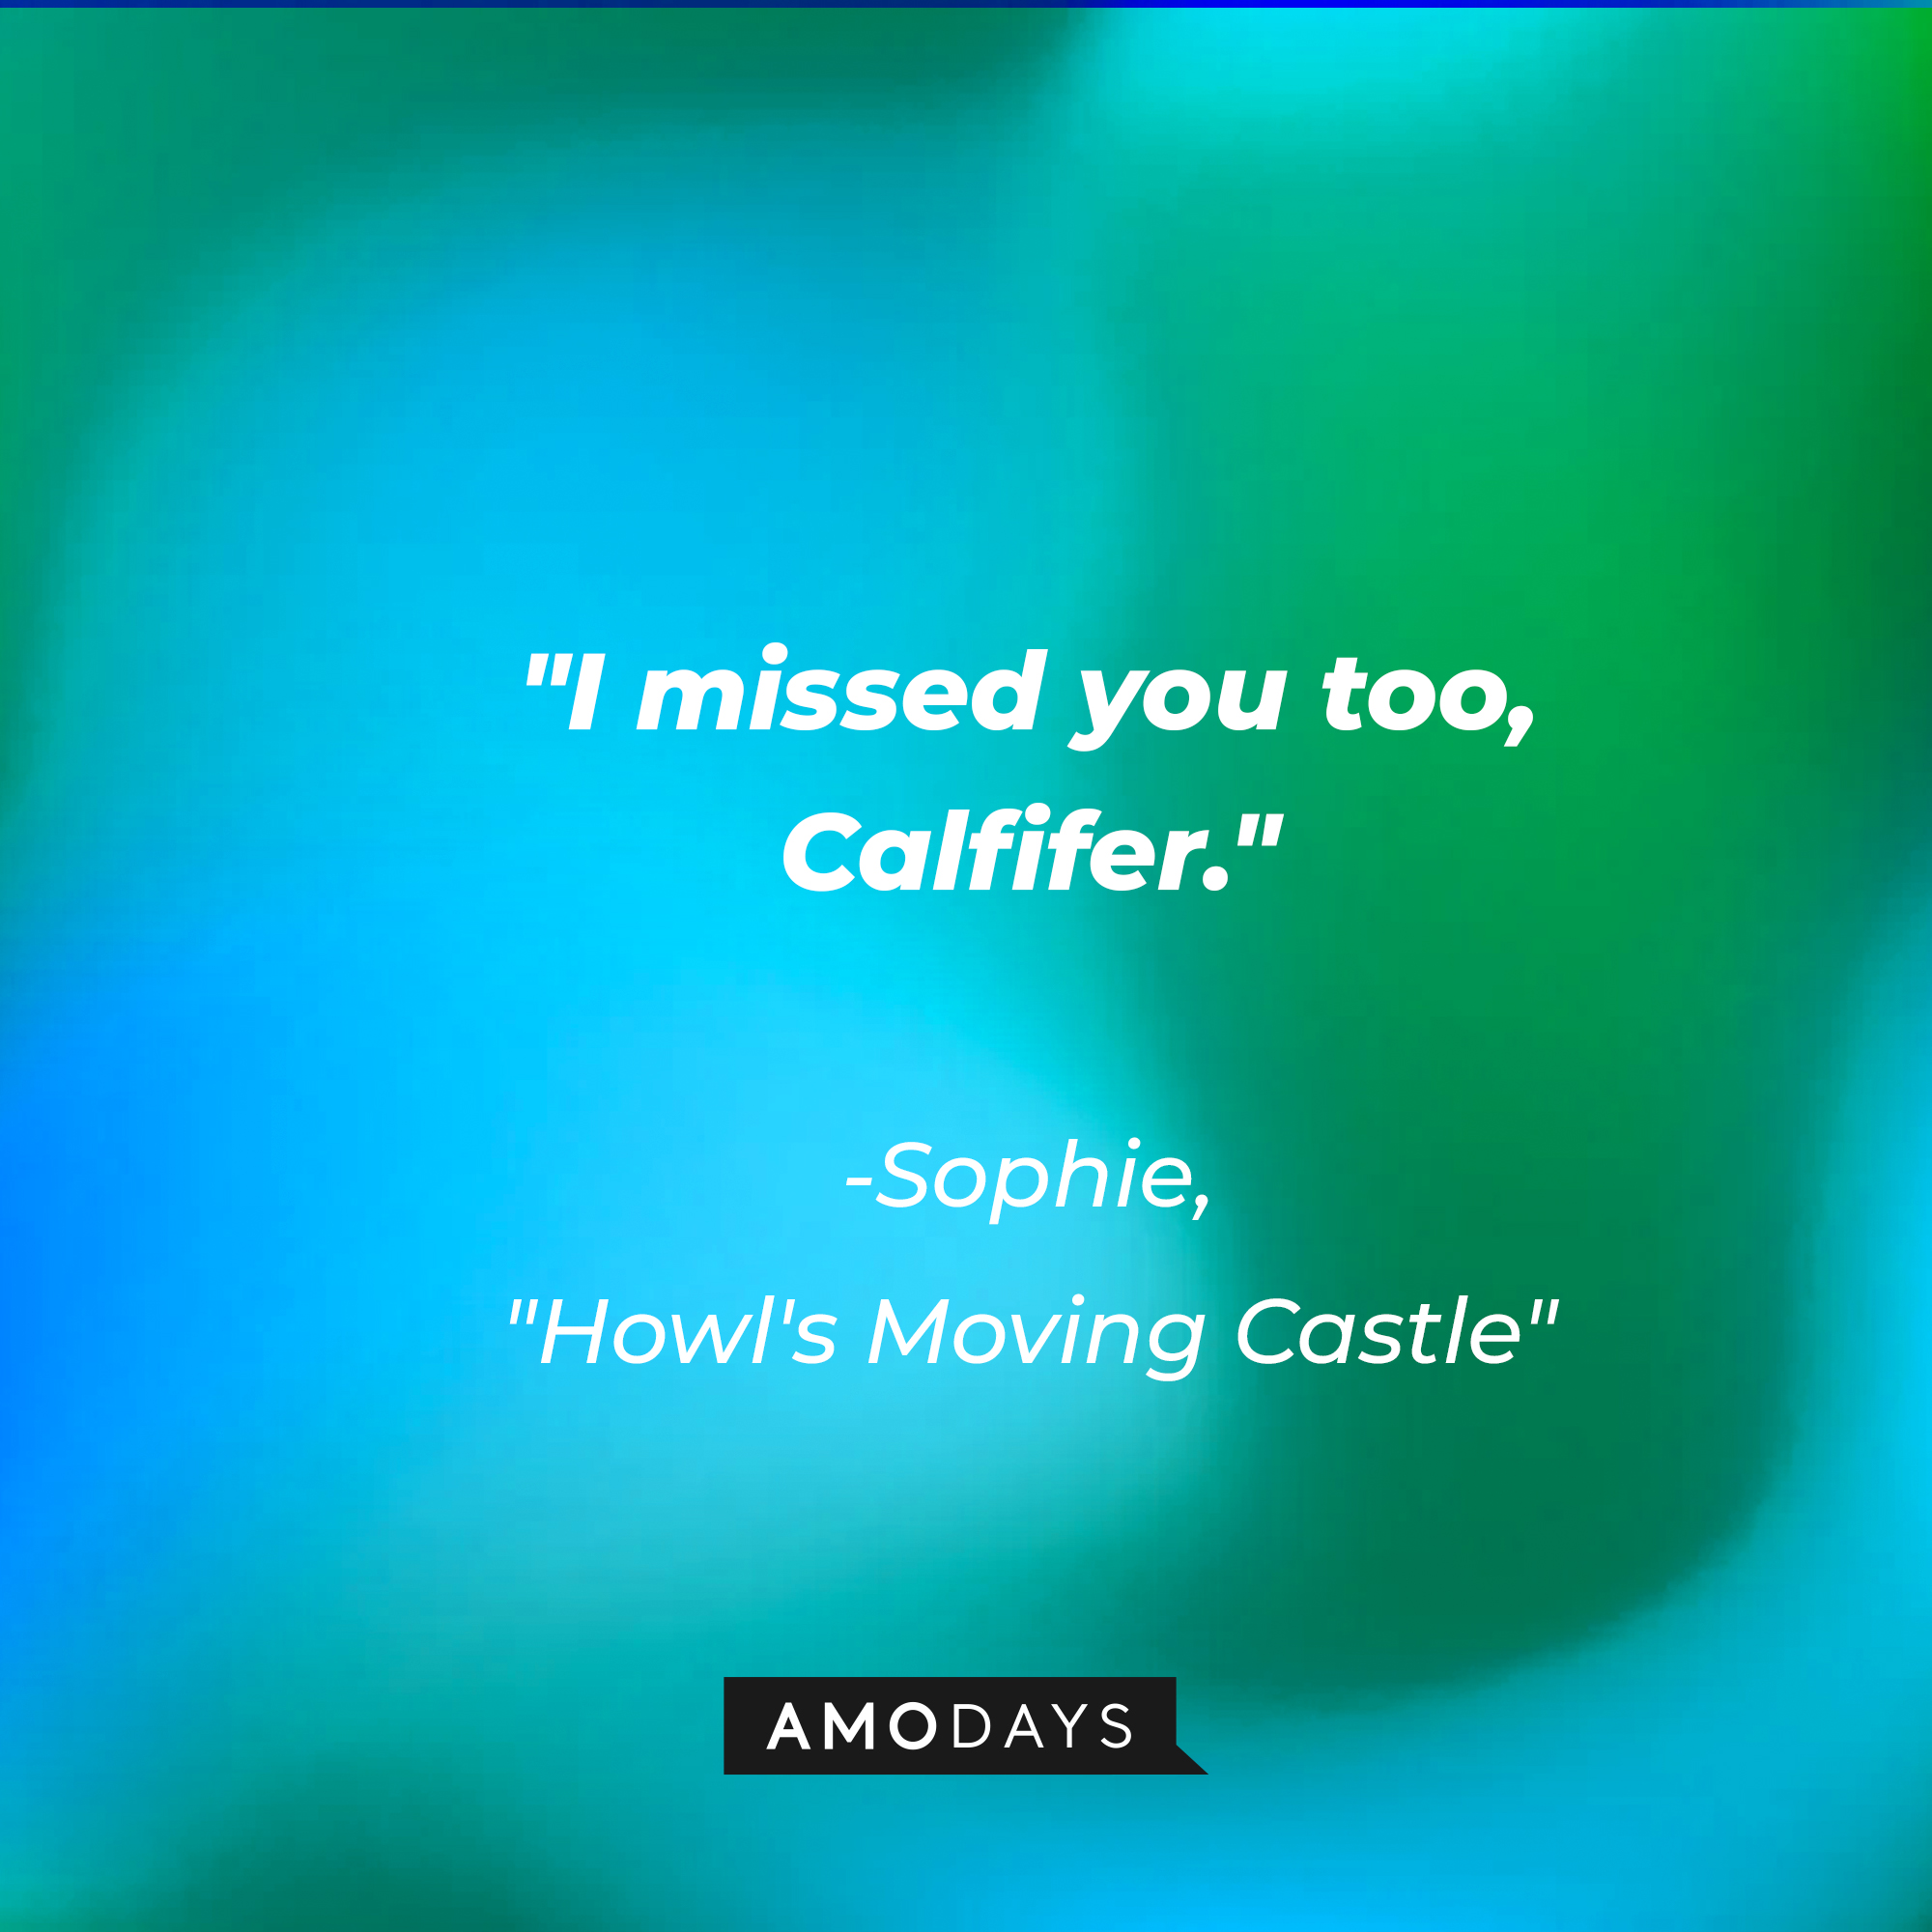 Sophie's quote in "Howl's Moving Castle:" "I missed you too, Calfifer." | Source: AmoDays